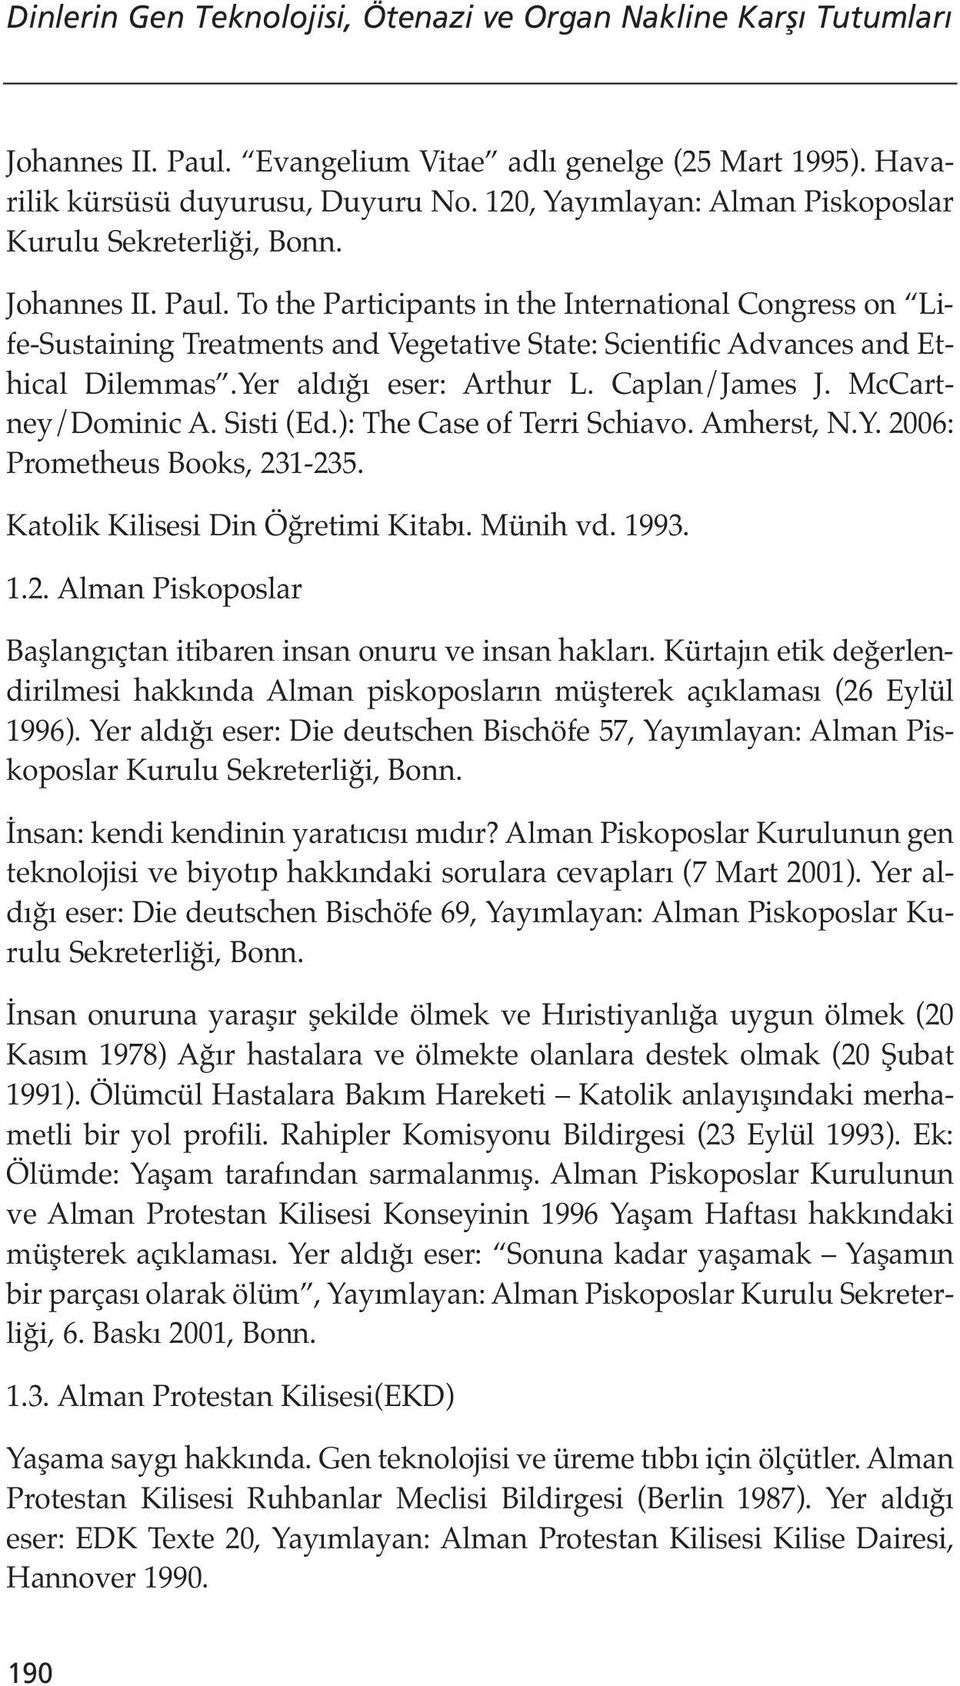 To the Participants in the International Congress on Life-Sustaining Treatments and Vegetative State: Scientific Advances and Ethical Dilemmas.Yer aldığı eser: Arthur L. Caplan/James J.